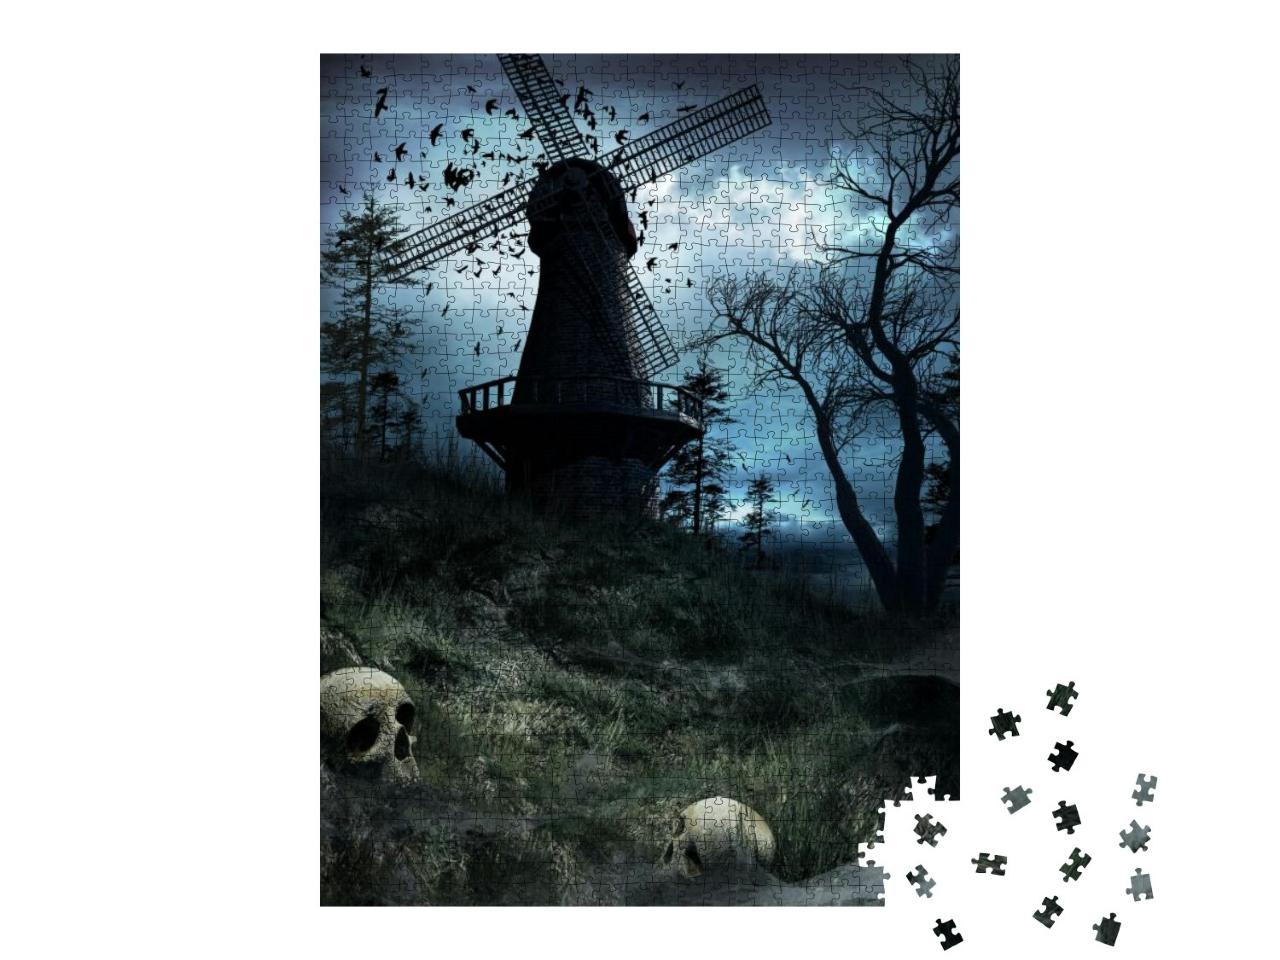 Gothic Scenery with Huge Windmill, Birds & Skulls. 3D Ill... Jigsaw Puzzle with 1000 pieces